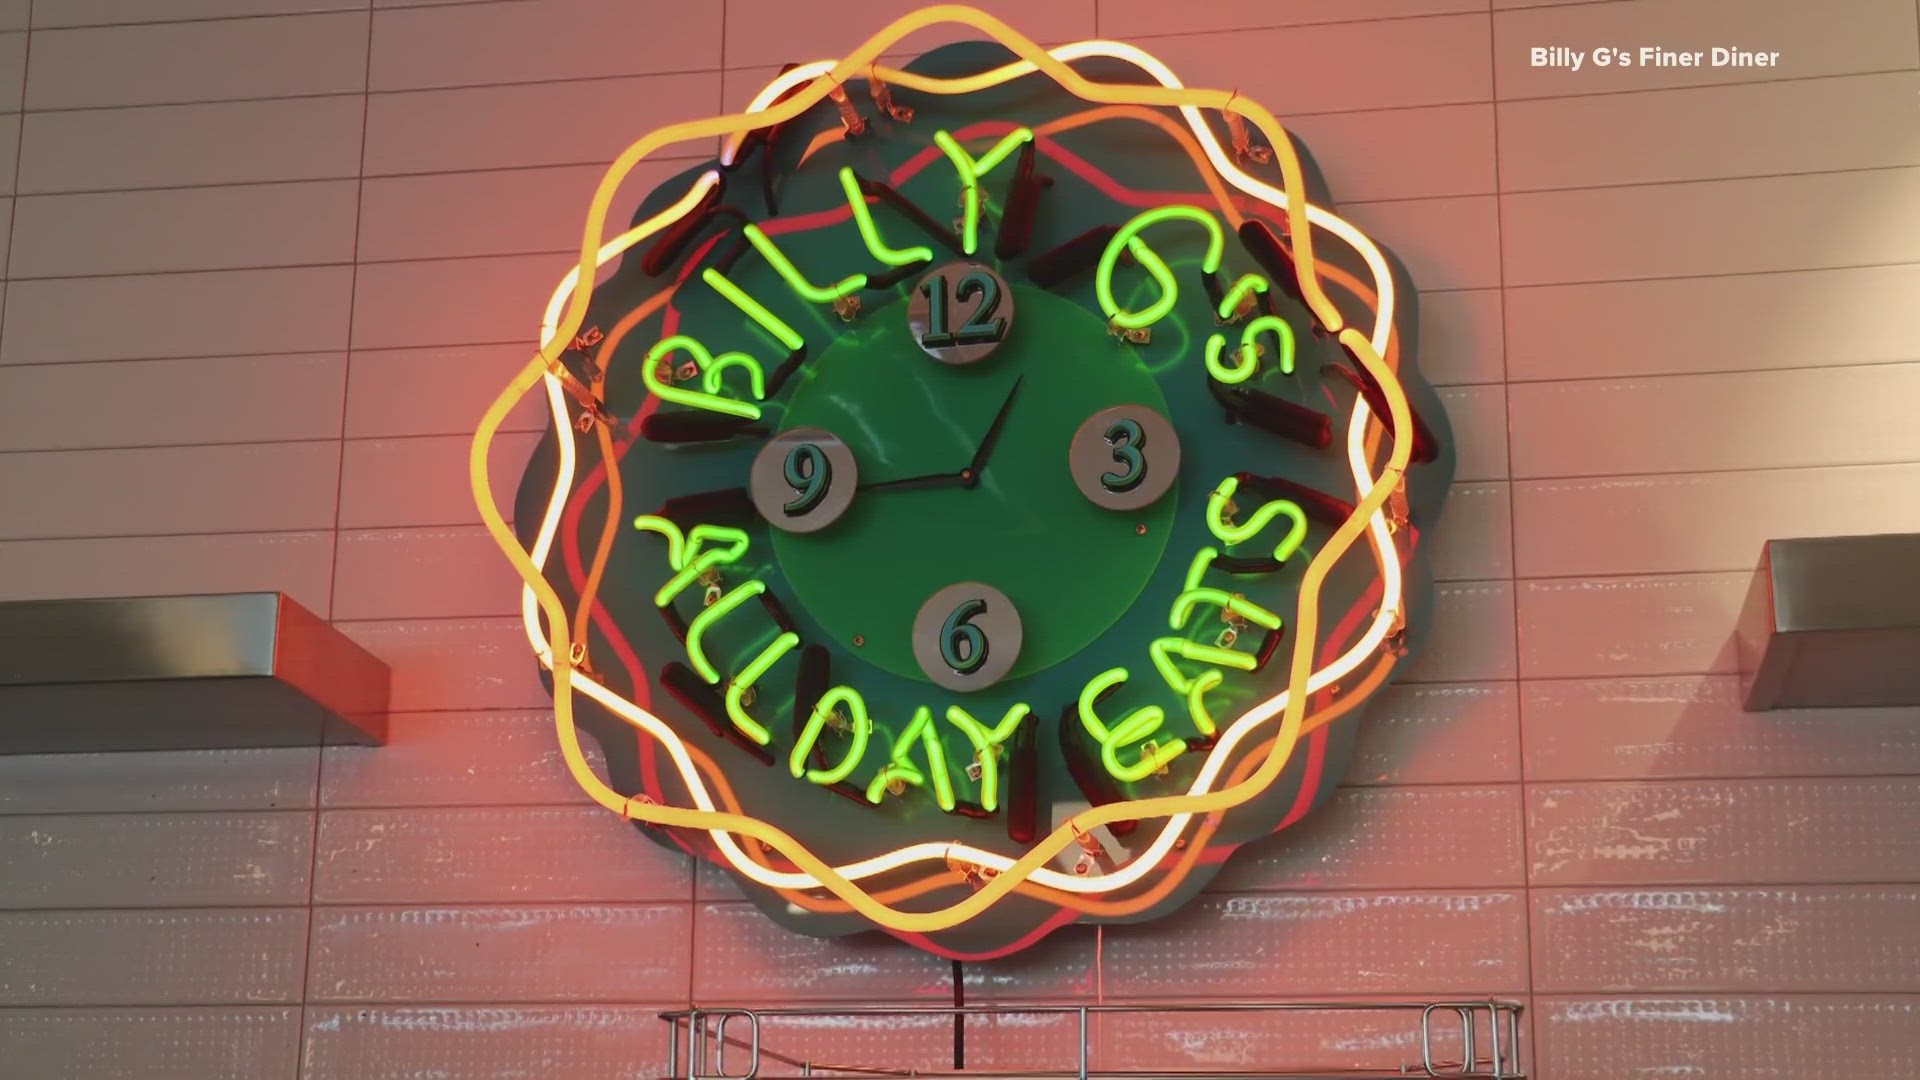 Billy G's will host a bacon-cutting Tuesday at its location on Clarkson Road. The diner will be open Tuesdays through Sundays, with lunch and breakfast all day.